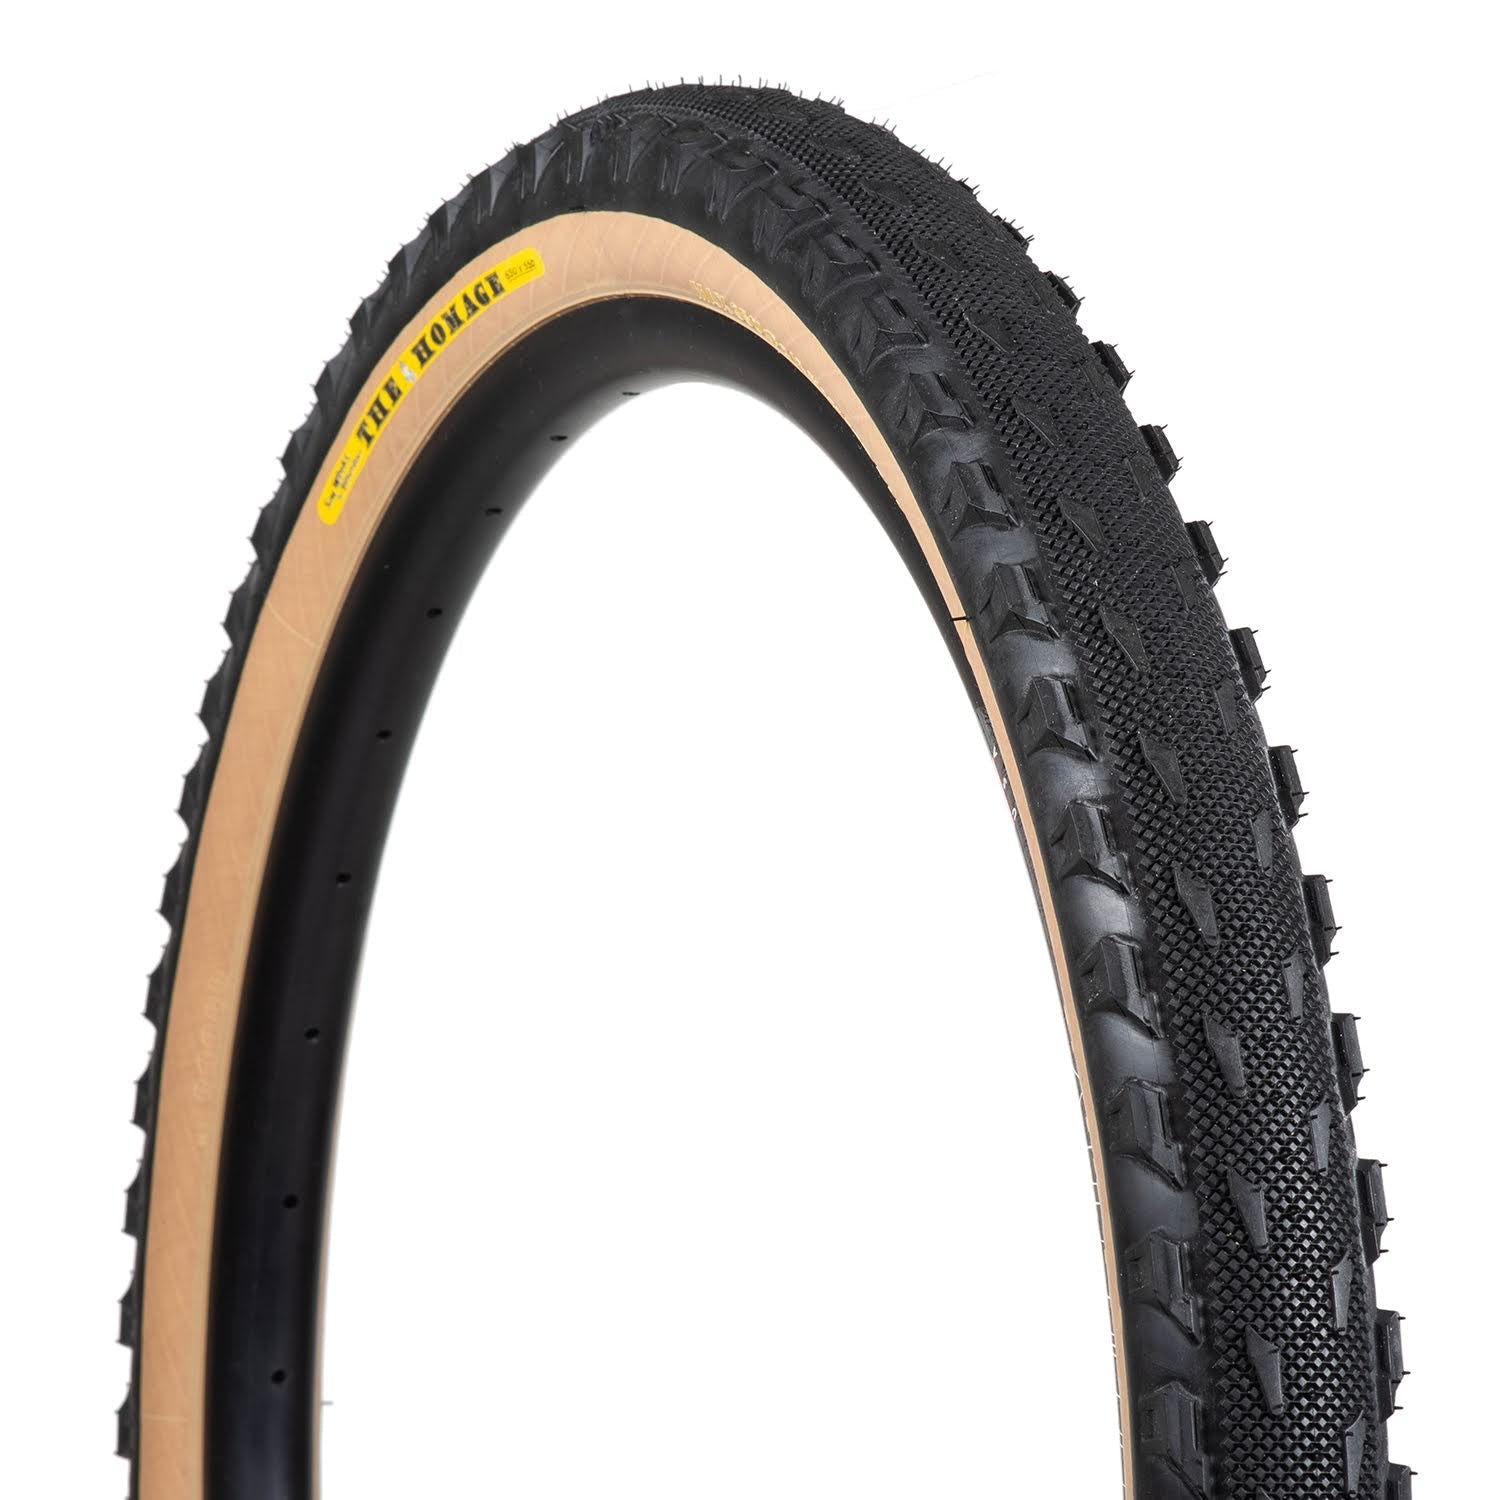 The Homage Tire 700c